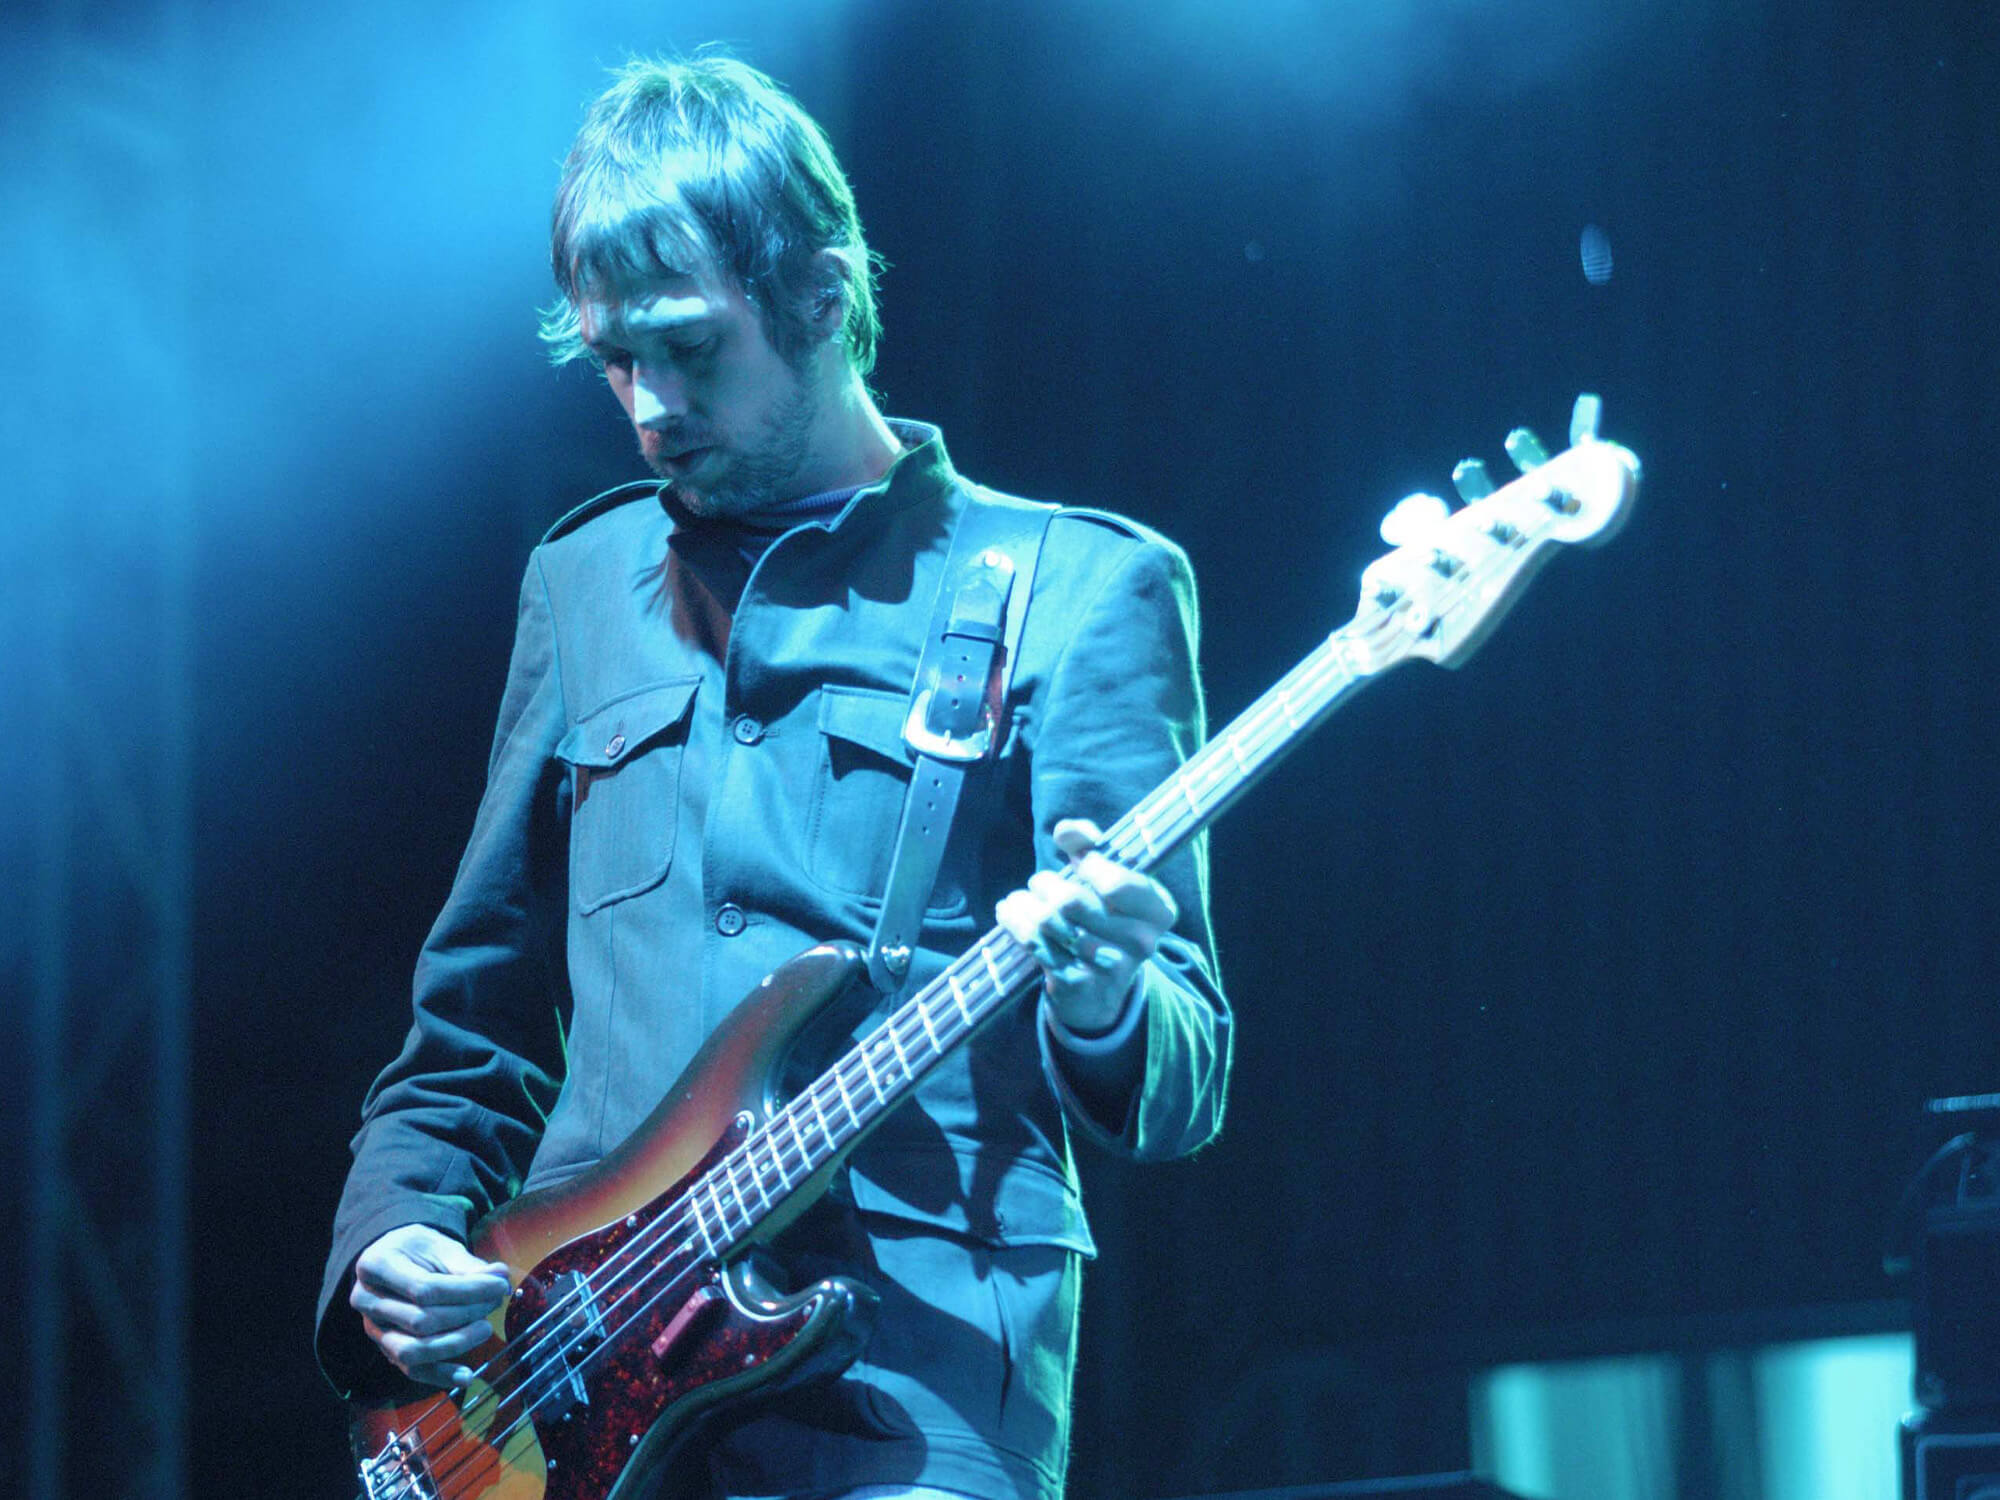 Andy Bell playing bass with Oasis. He's looking down at his instrument and stands under blue lighting.